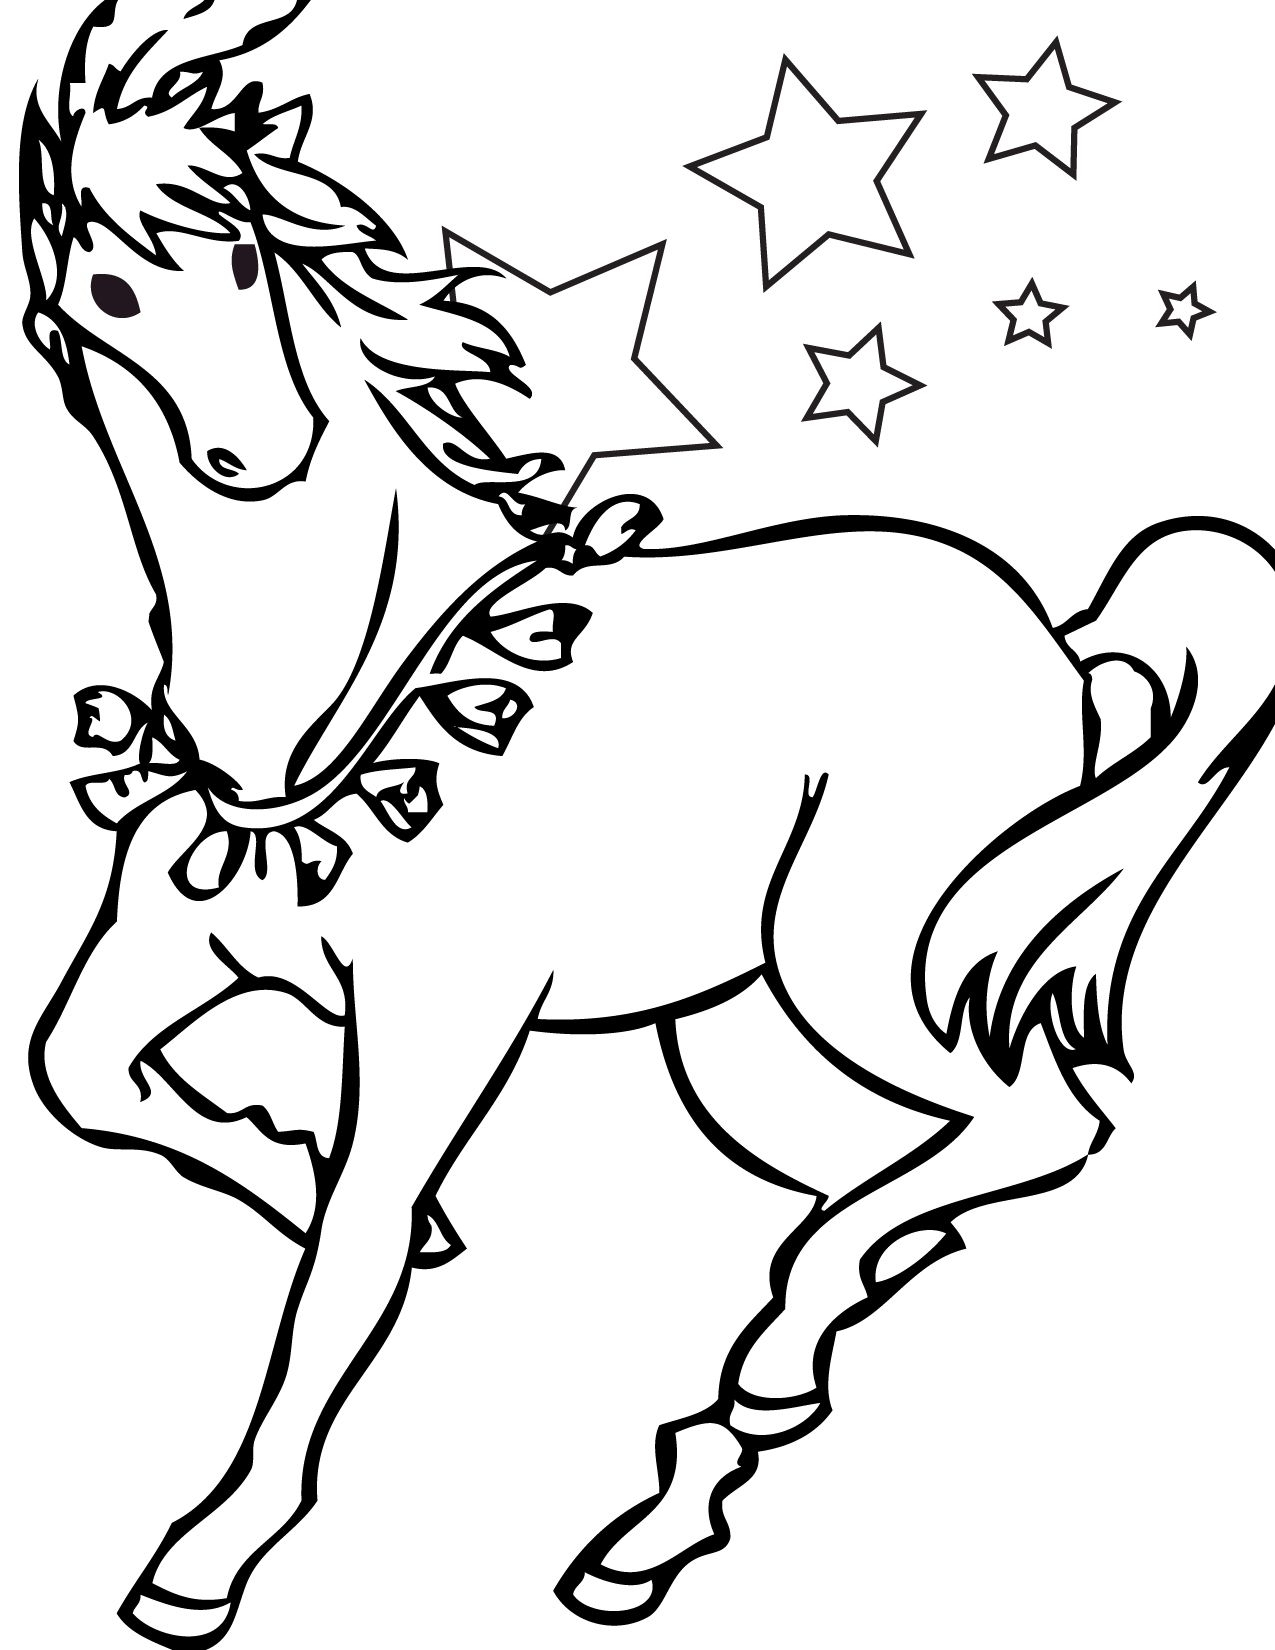 Free Printable Horse Coloring Pages For Kids | Little Ones | Horse - Free Printable Horse Coloring Pages